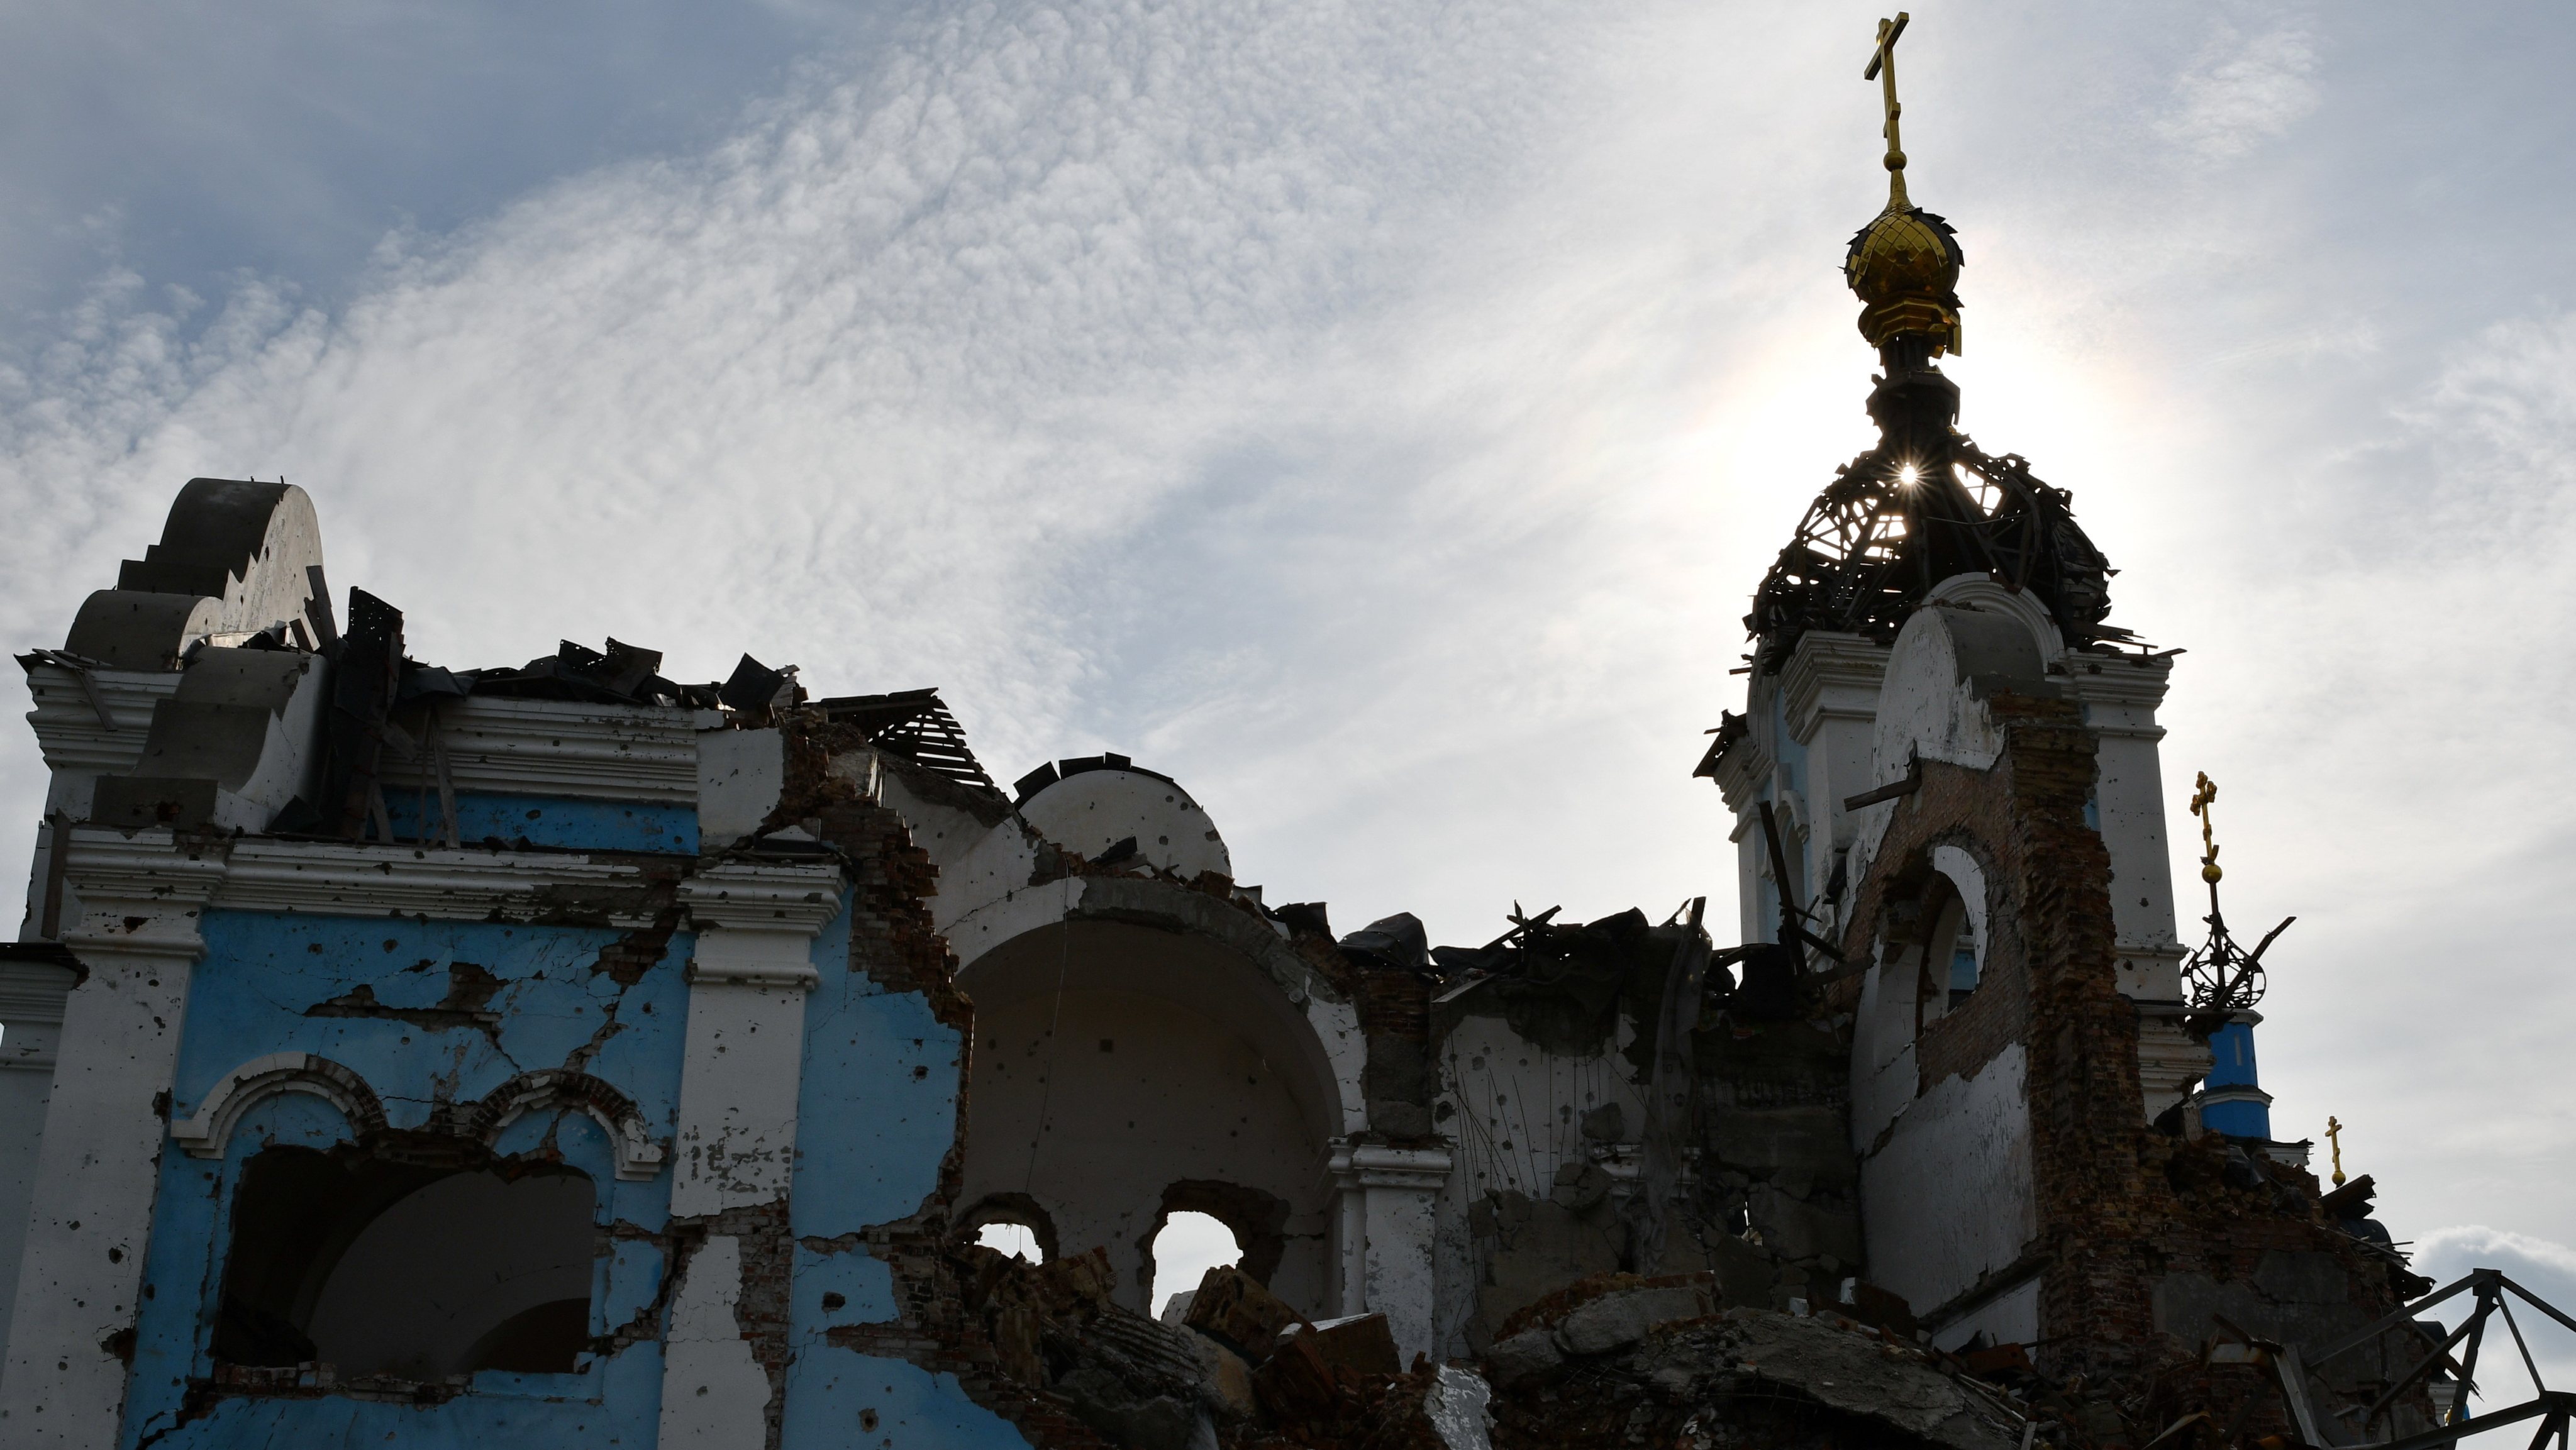 A view of a heavily damaged church in the retaken village of